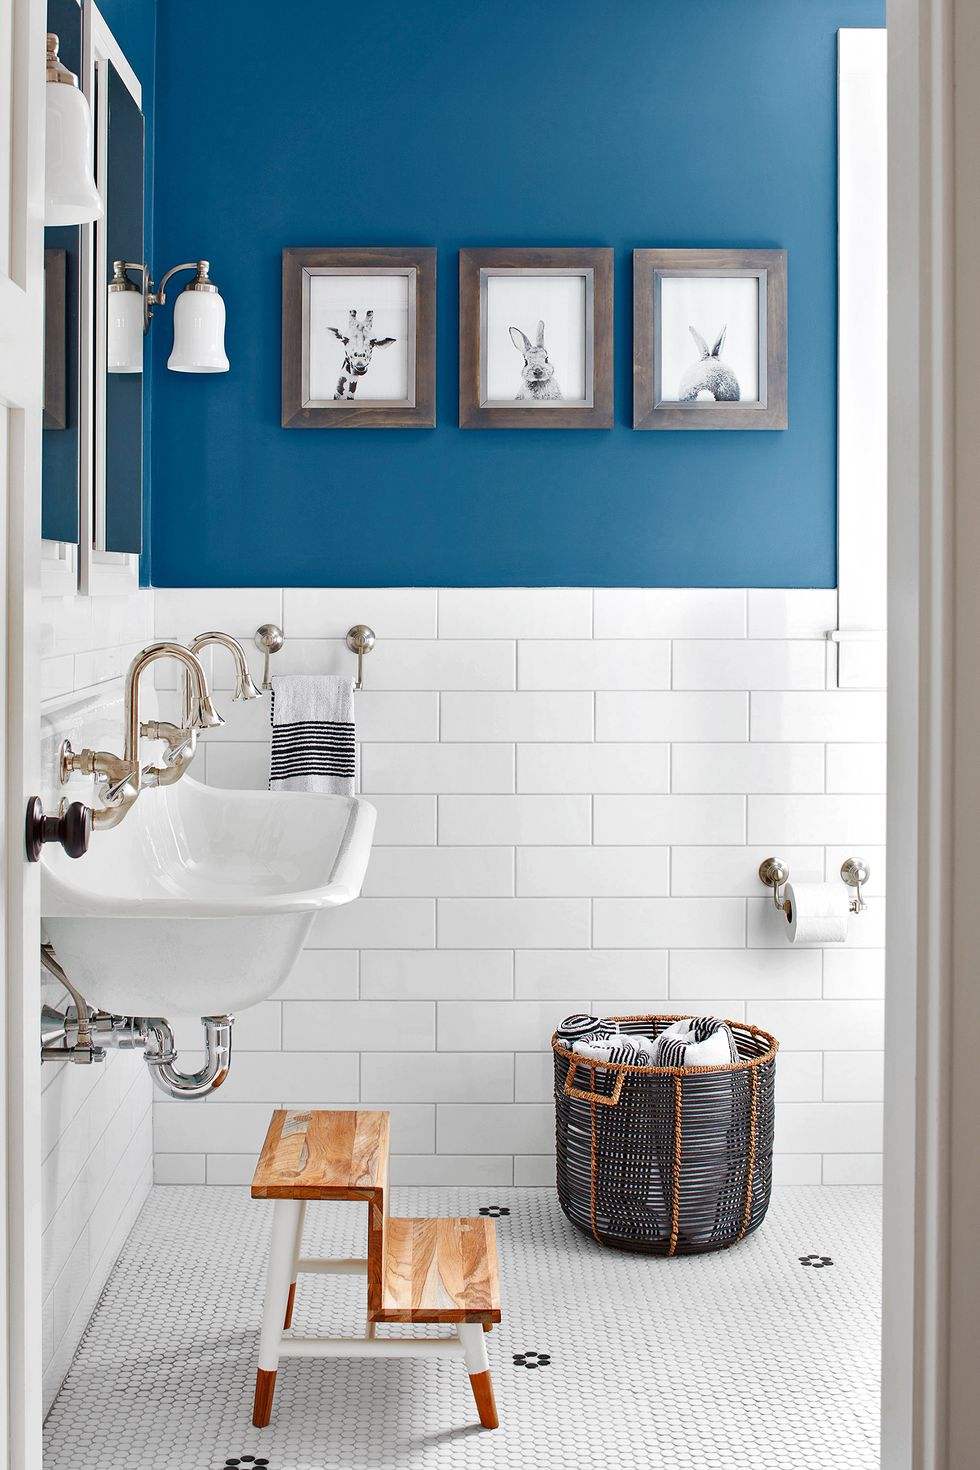 The 10 Best Paint Colors for Your Bathroom Vanity